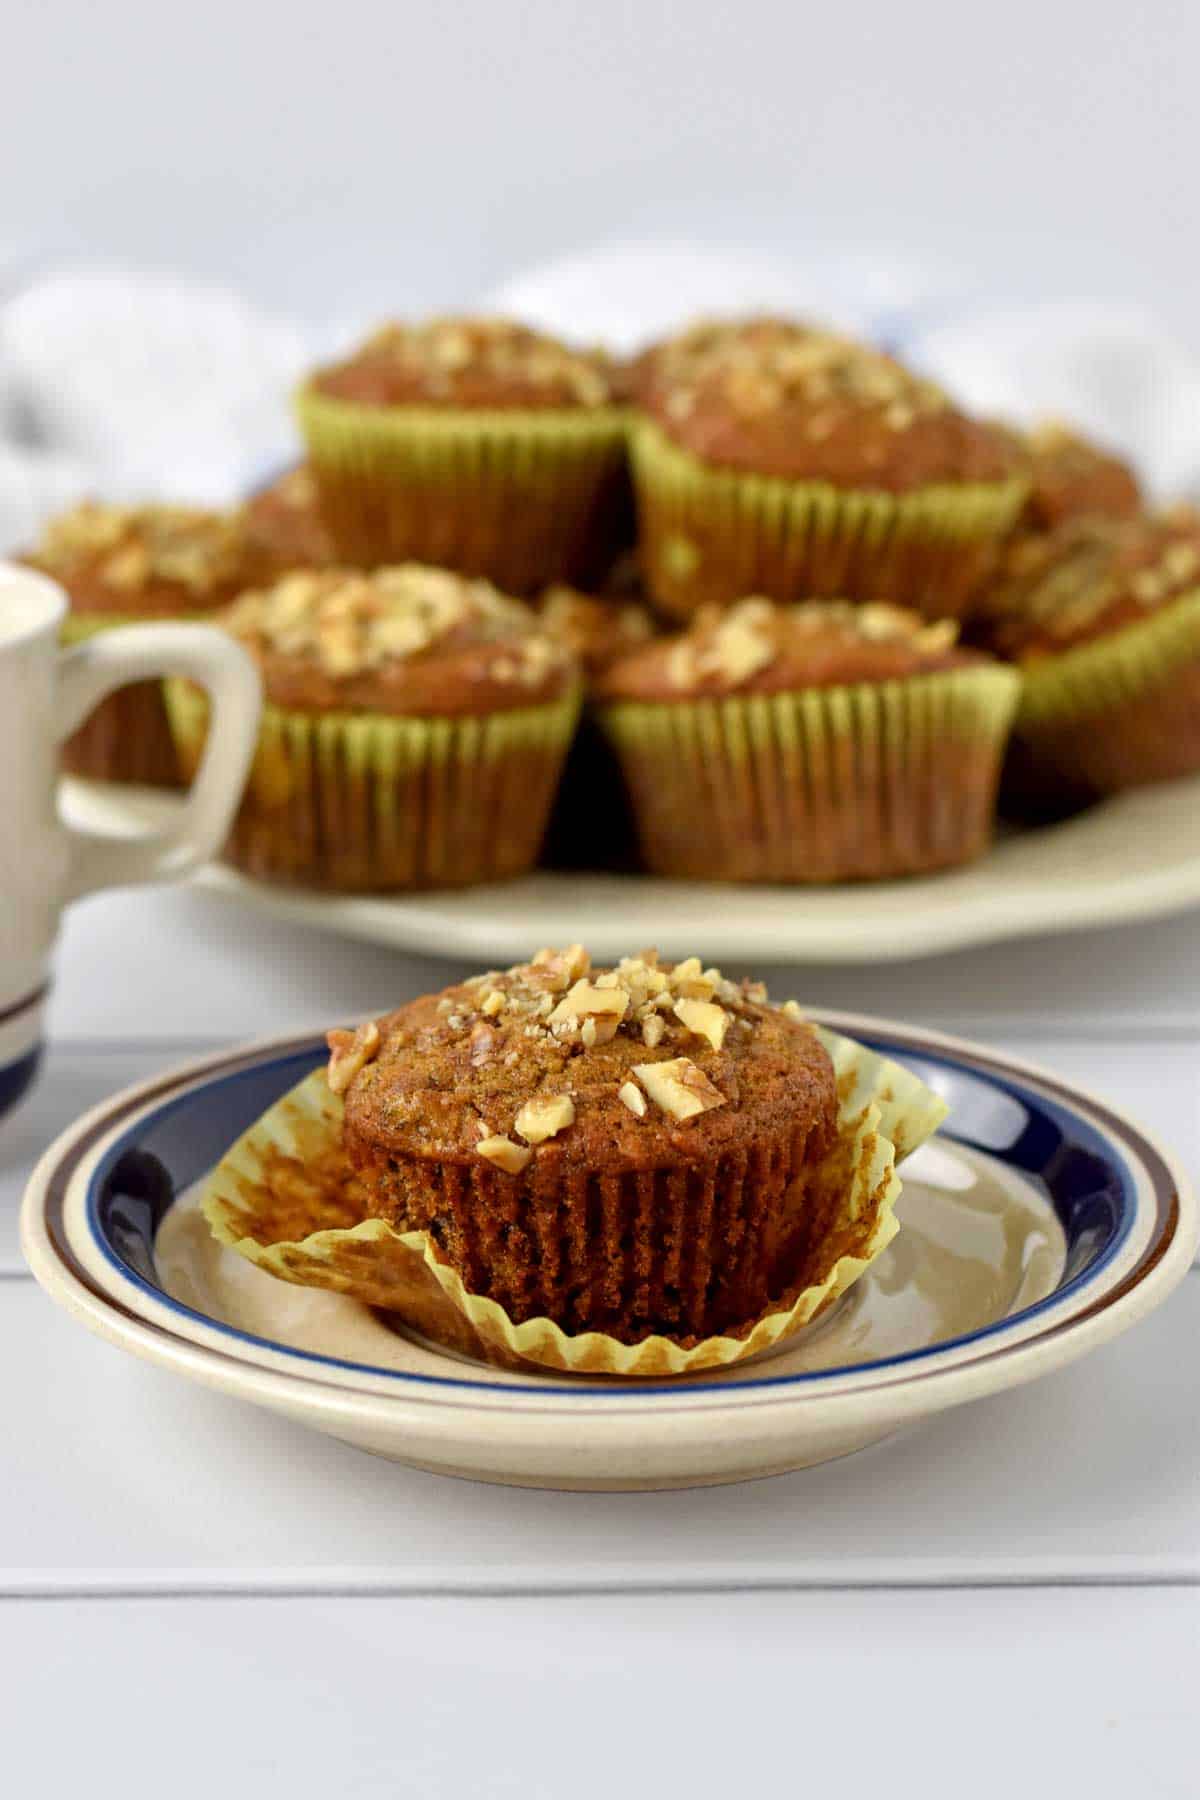 One gluten free banana nut muffin on a small plate with a coffee cup and more muffins in the background.